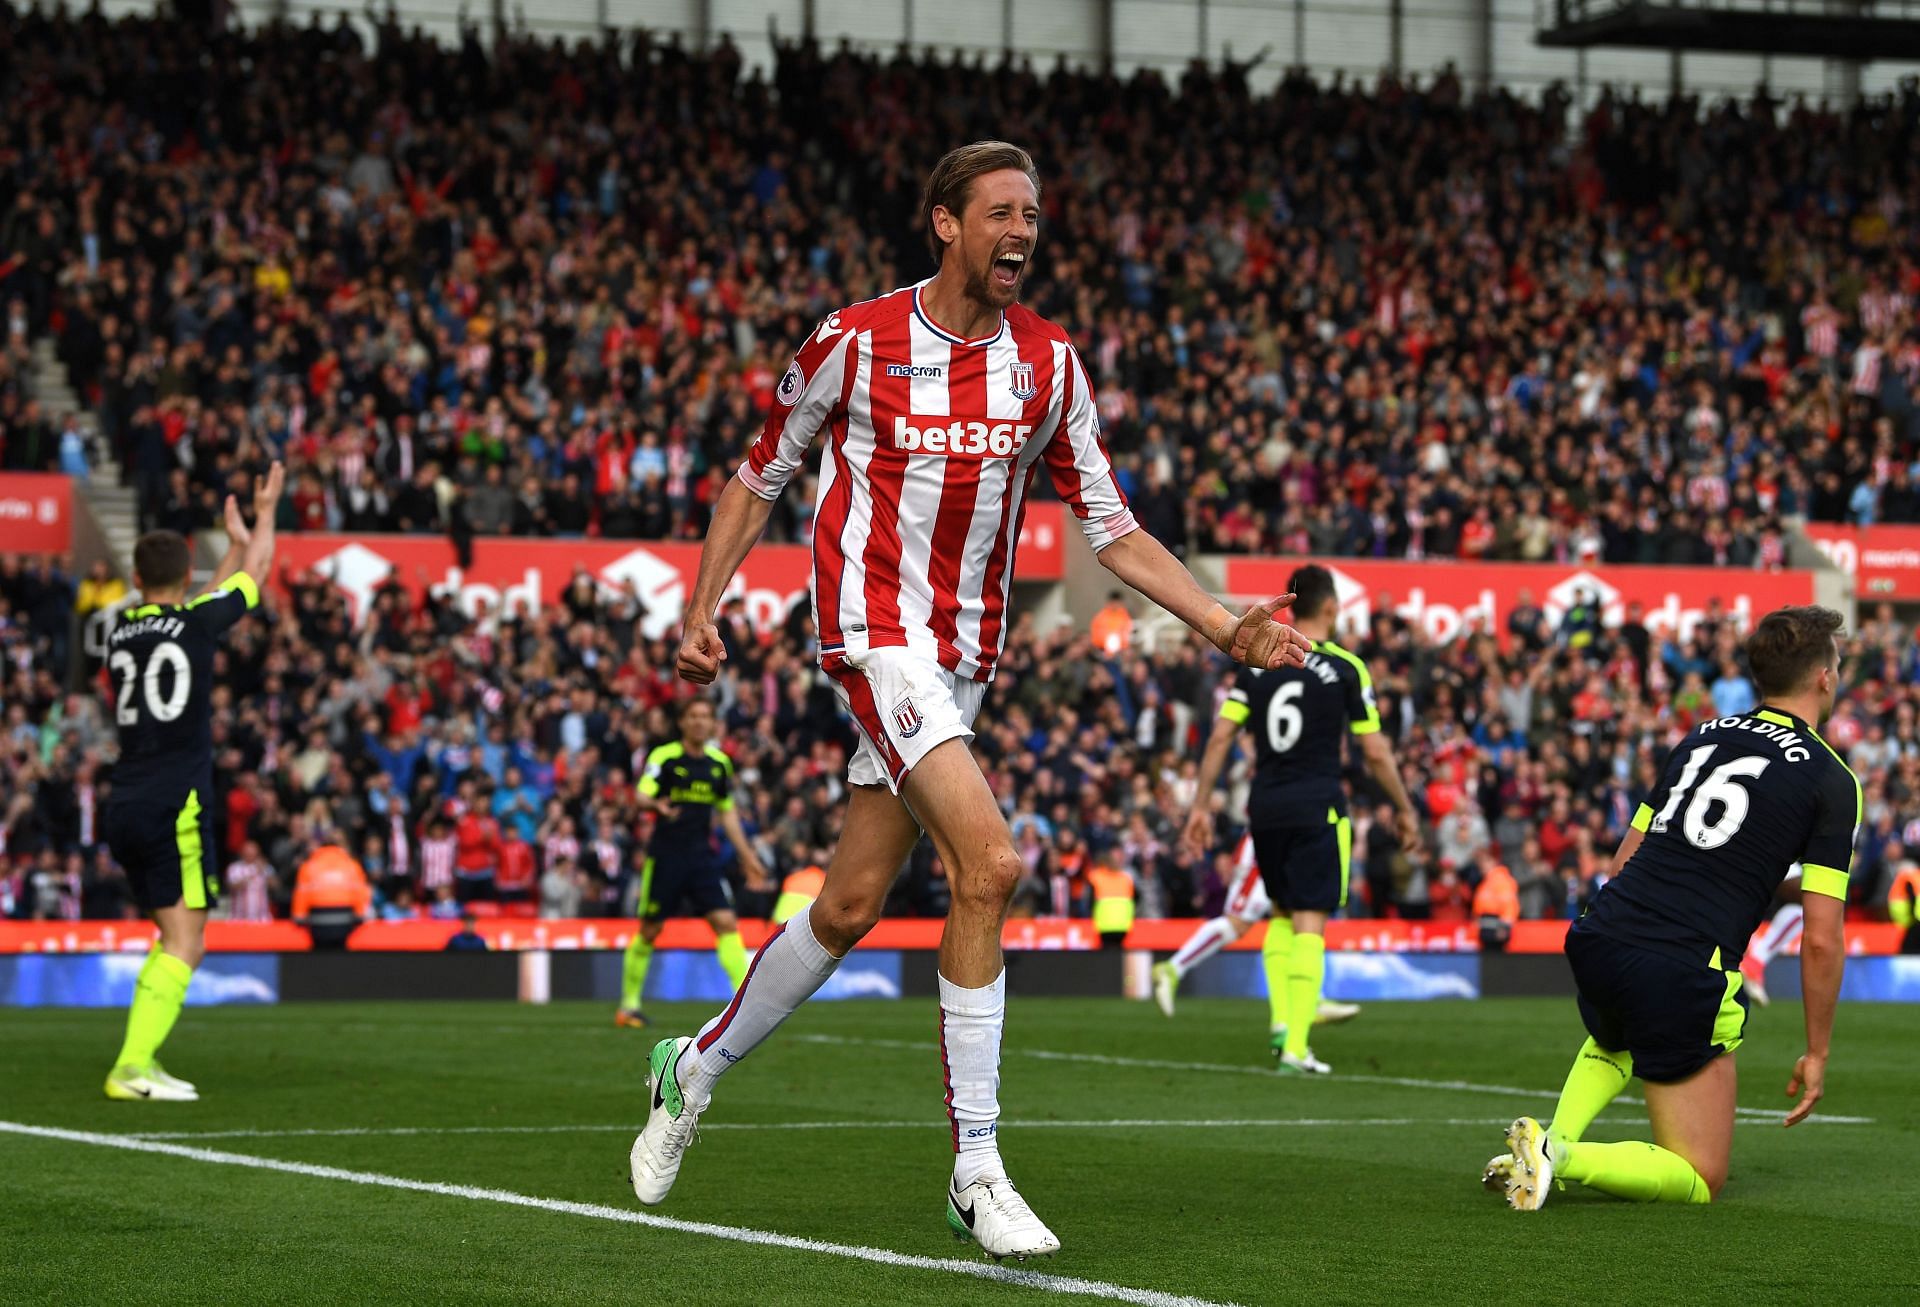 Peter Crouch was linked with a transfer to Chelsea late in his career